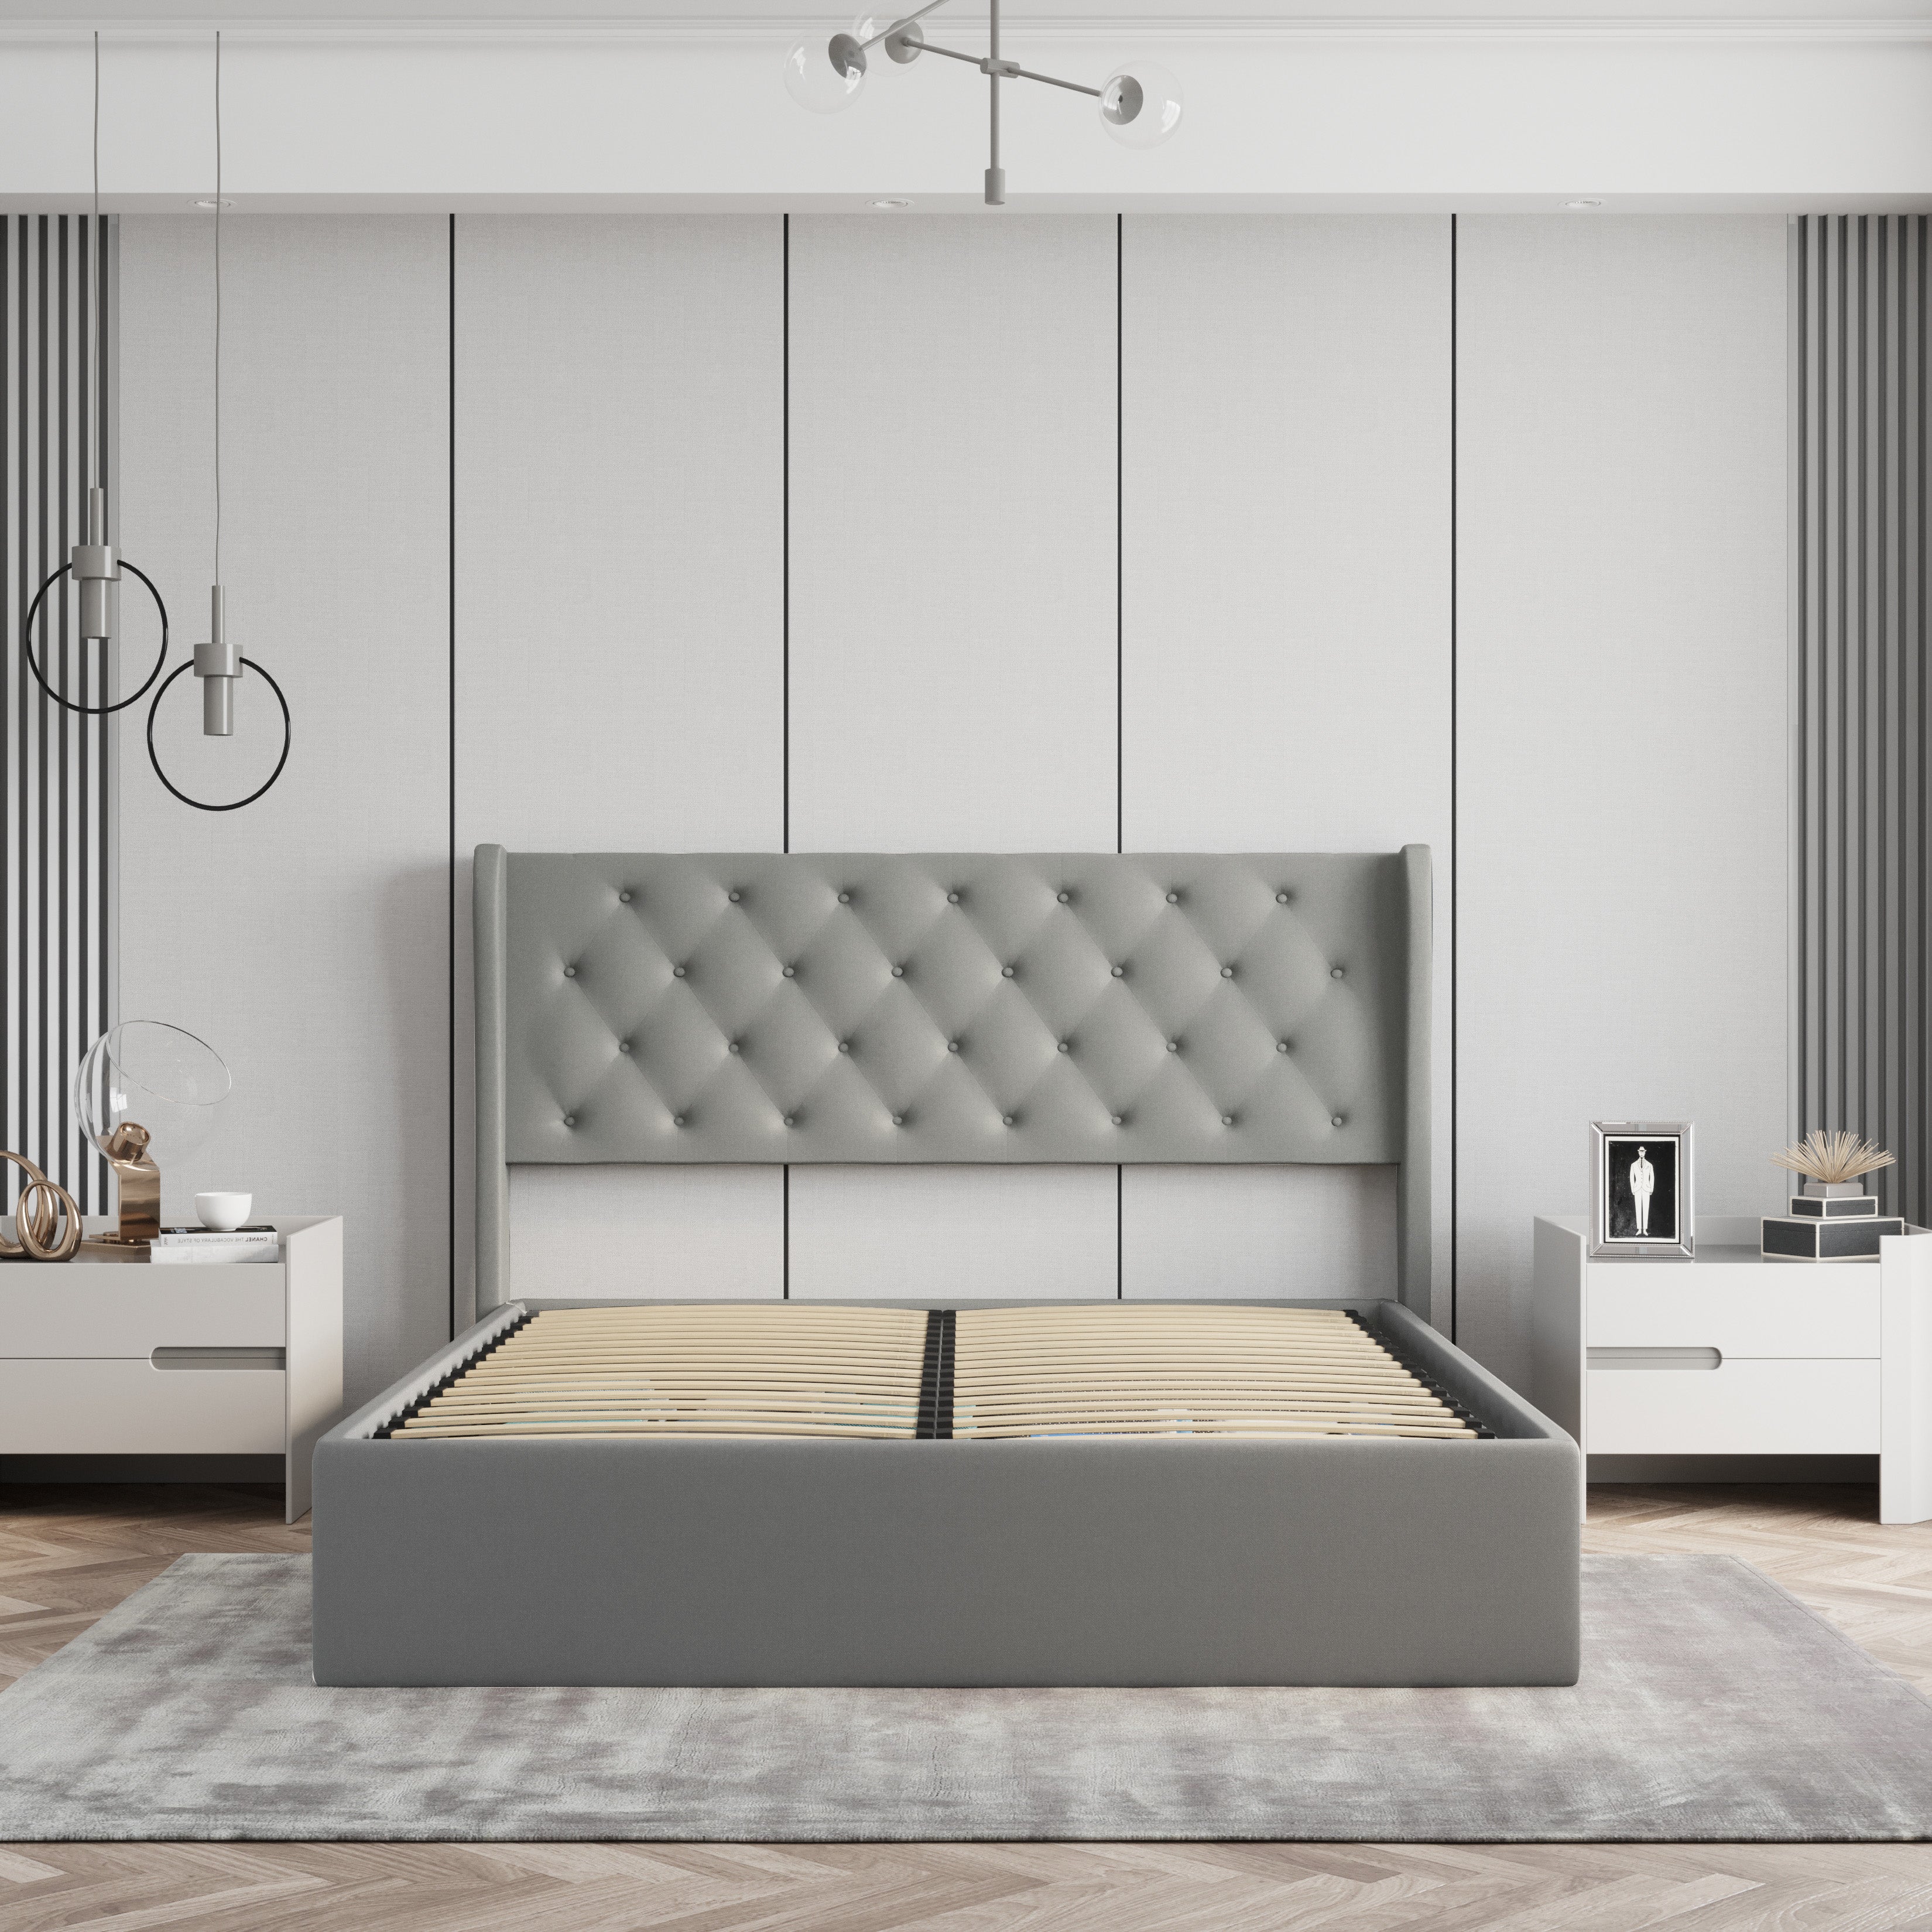 Velets Diva Contemporary Mid-Century Soft Padded Tufted Upholstered Platform Bed With Hydraulic Gas Lift Storage - Solid Wood Frame, Wood Slat System & Smart Hydraulic Under-Bed Storage - Light Gray